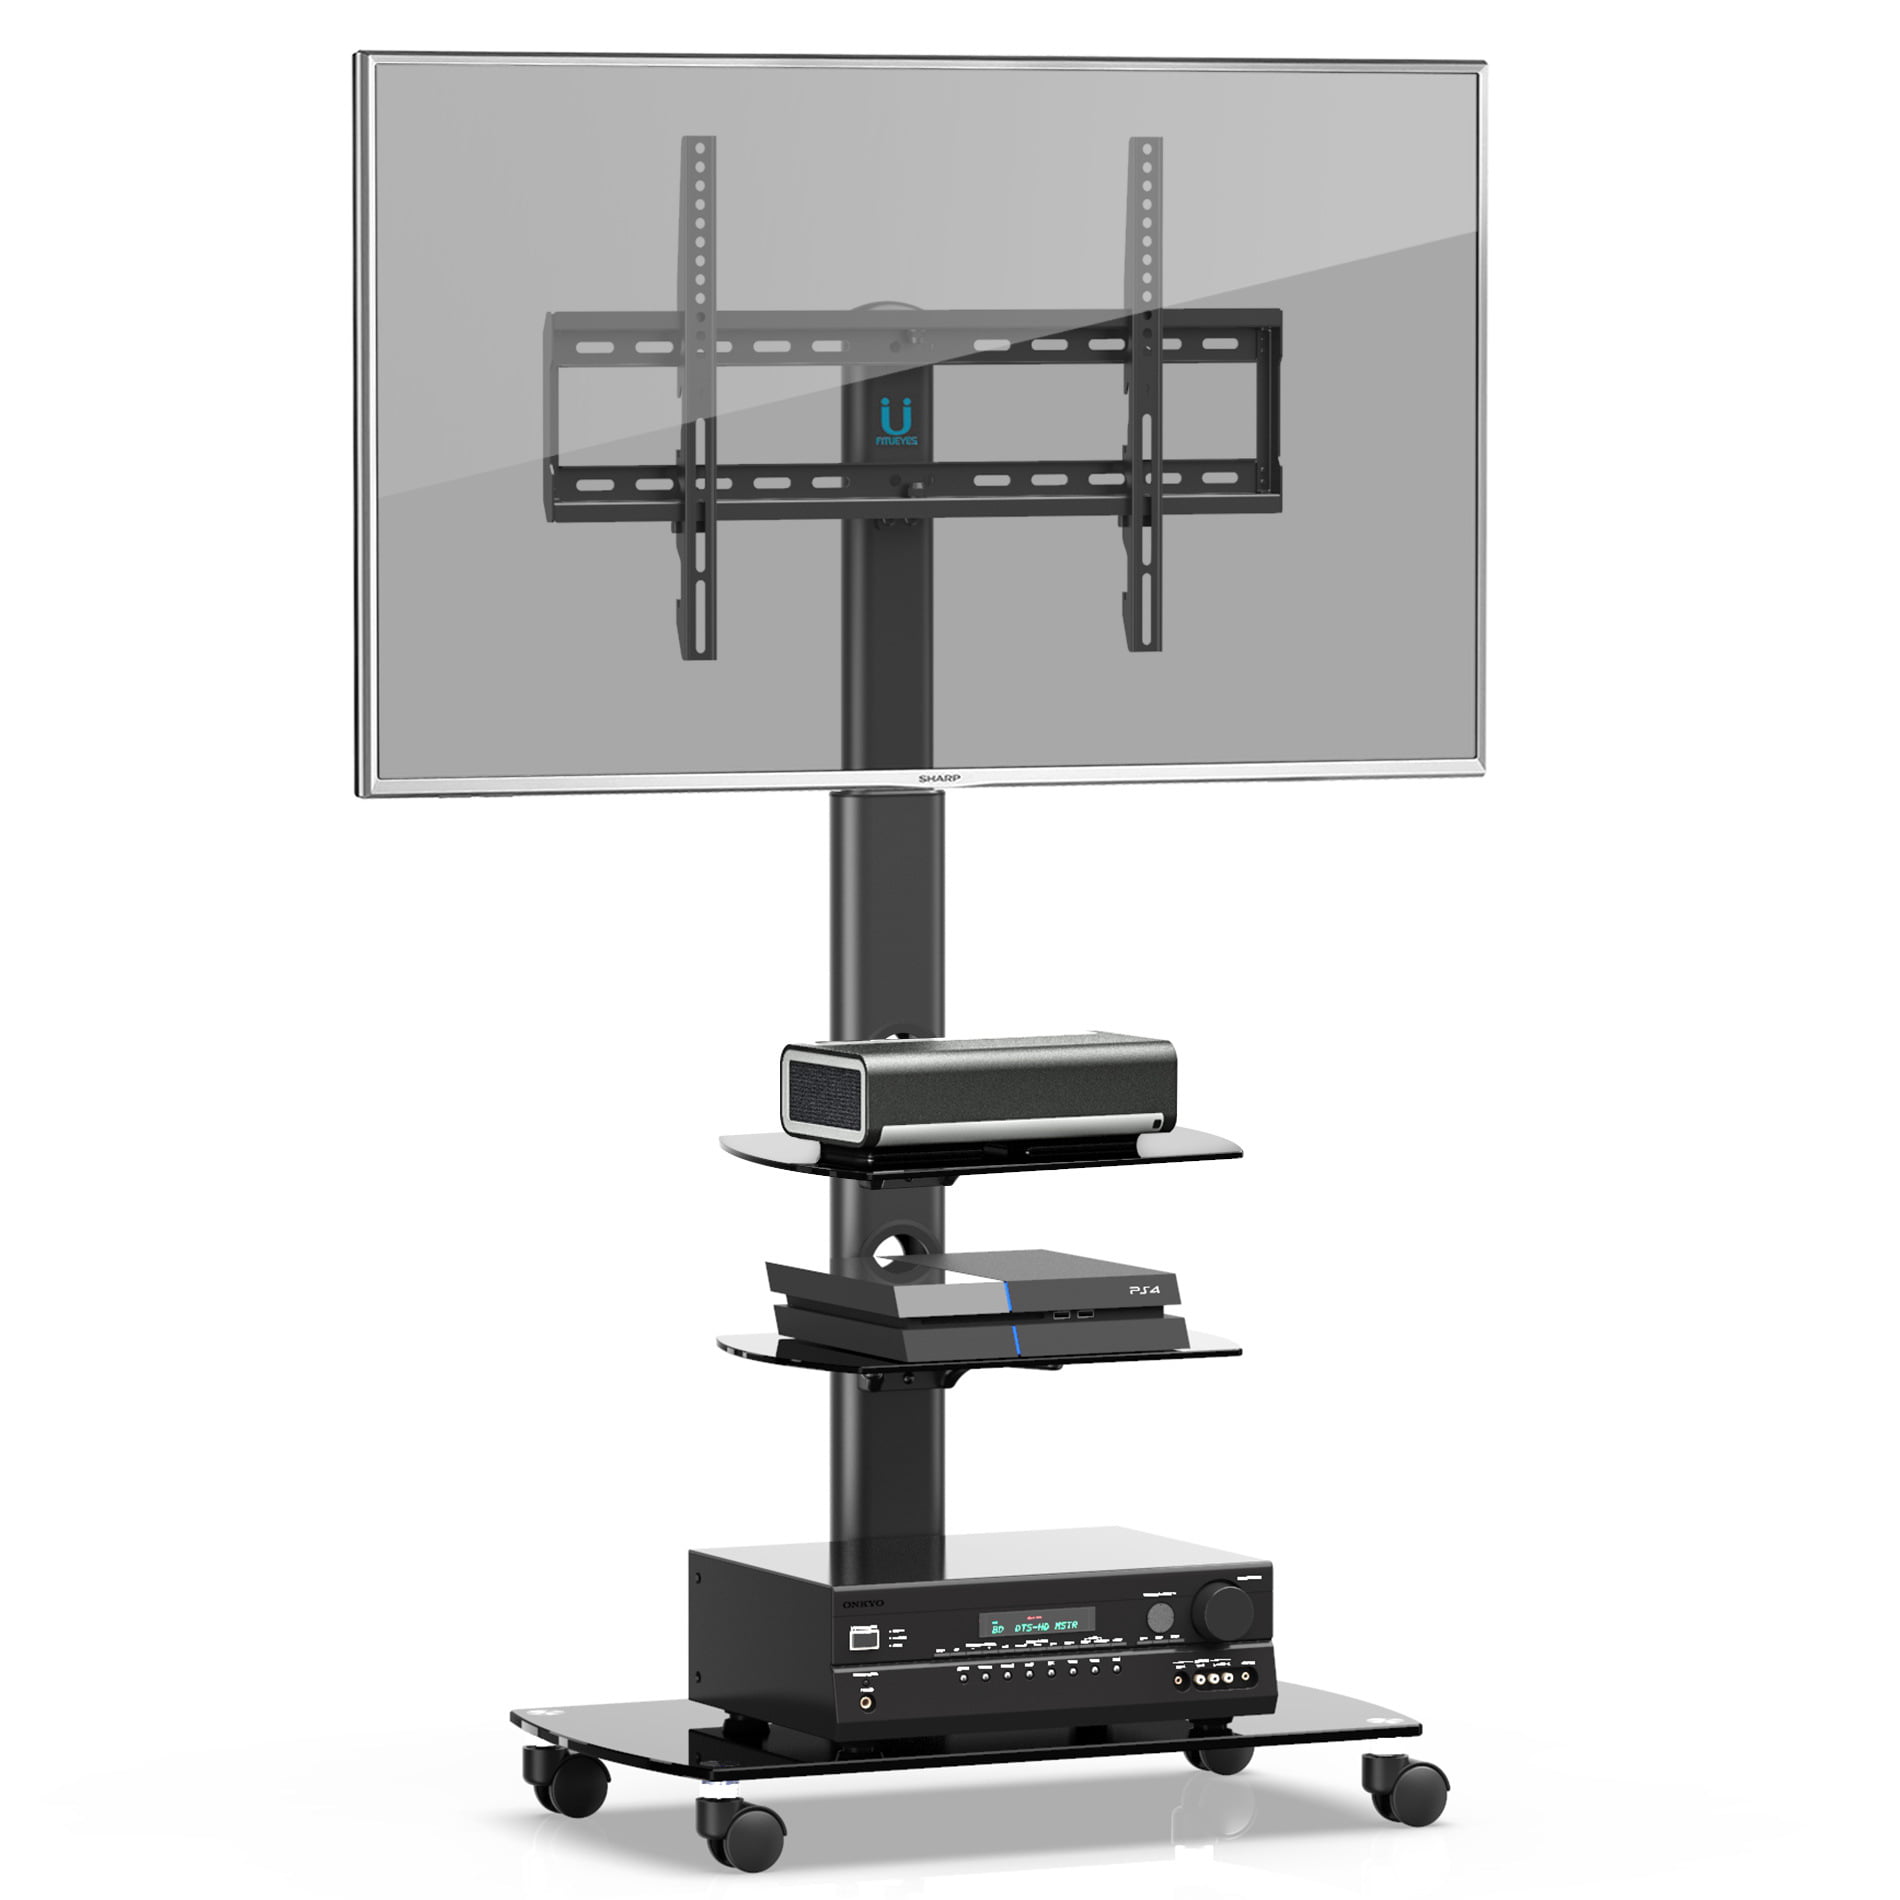 FITUEYES Mobile TV Stand/Cart with Wheels Swivel Mount and Shelves